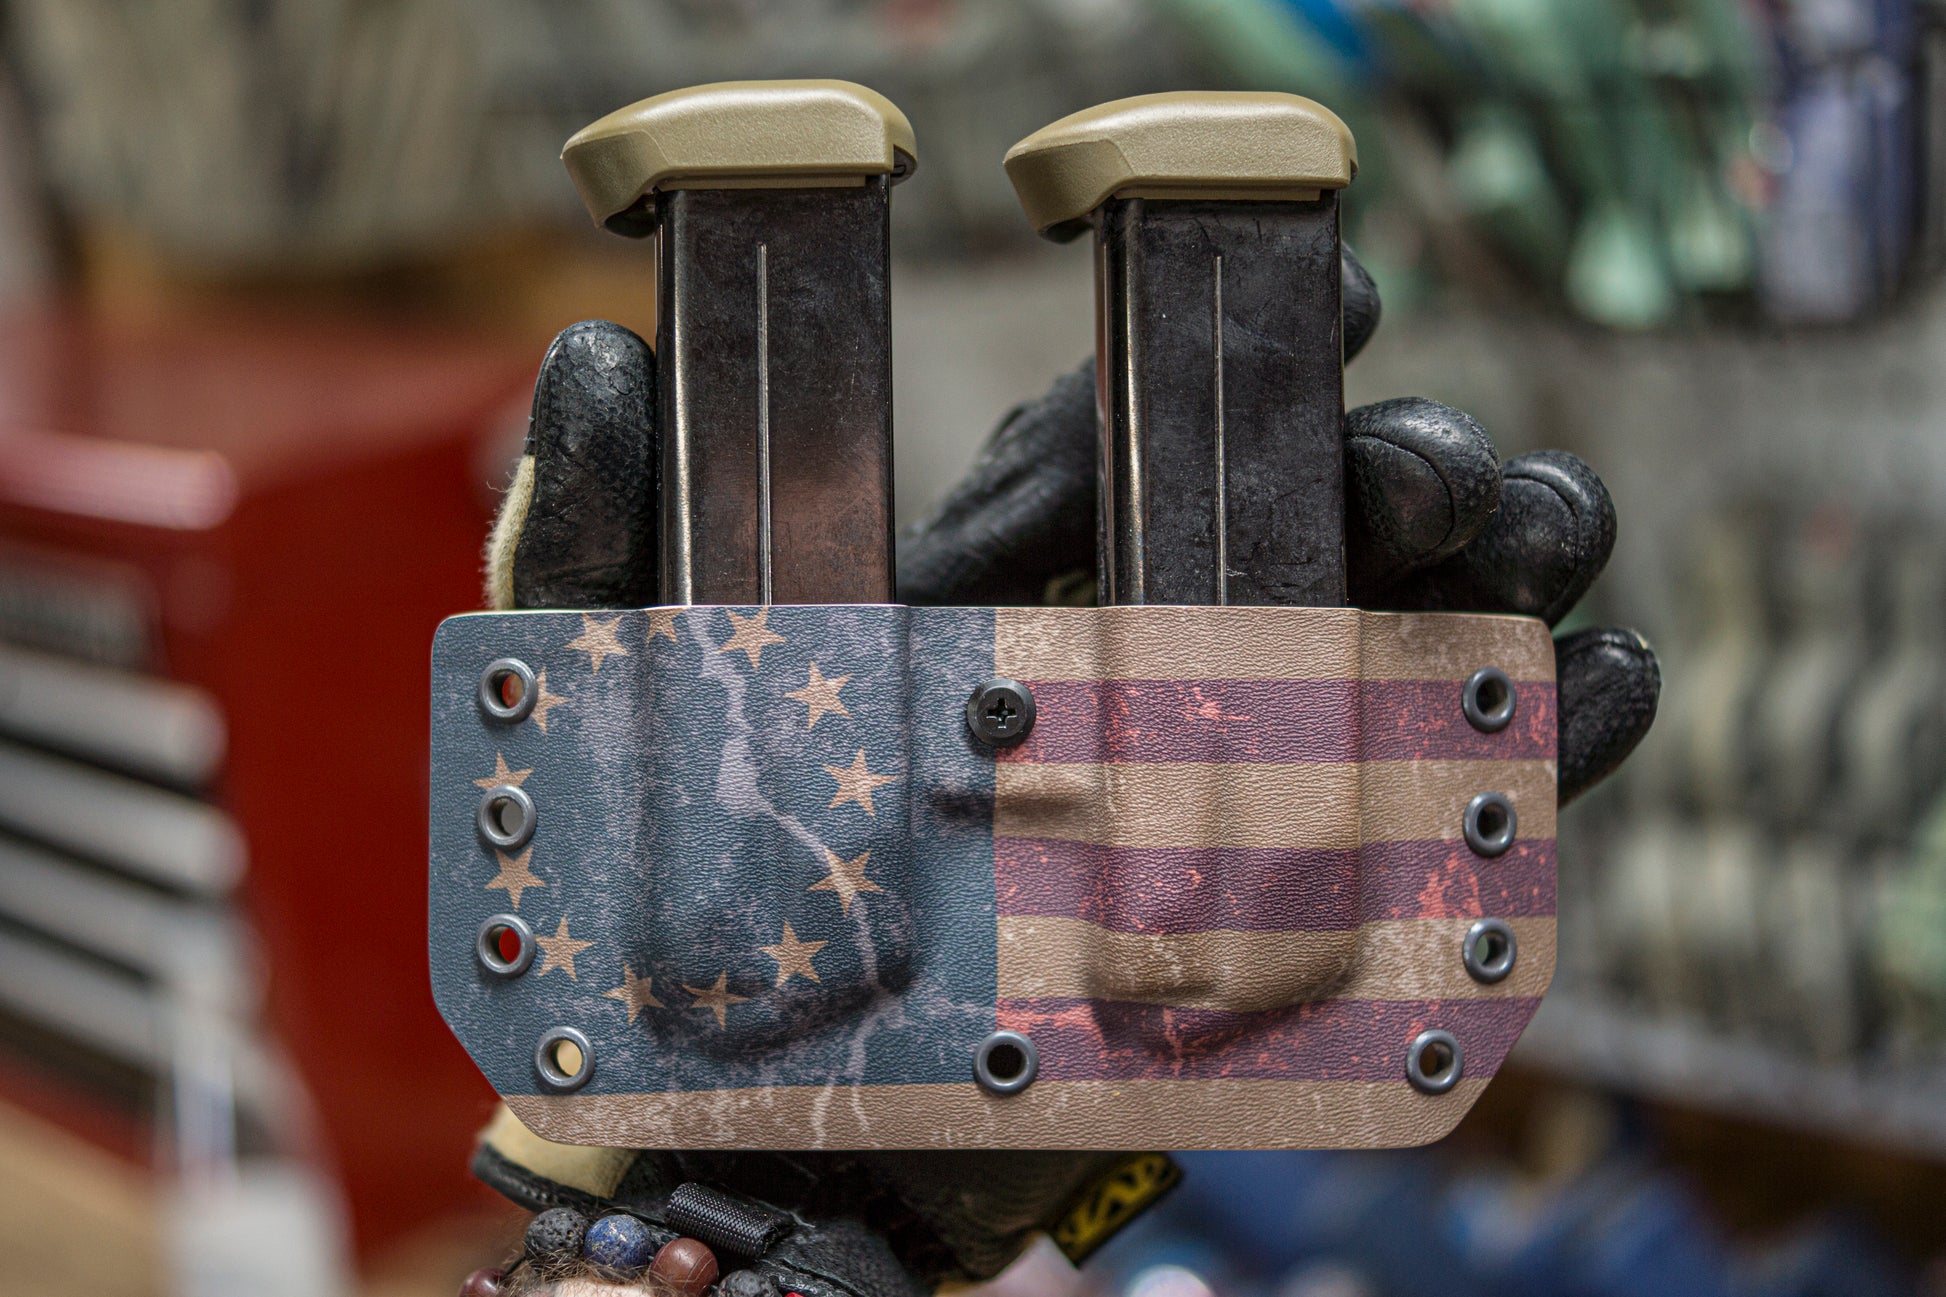 Double Magazine Carrier for an FNH FNX 45 in Betsy Ross.